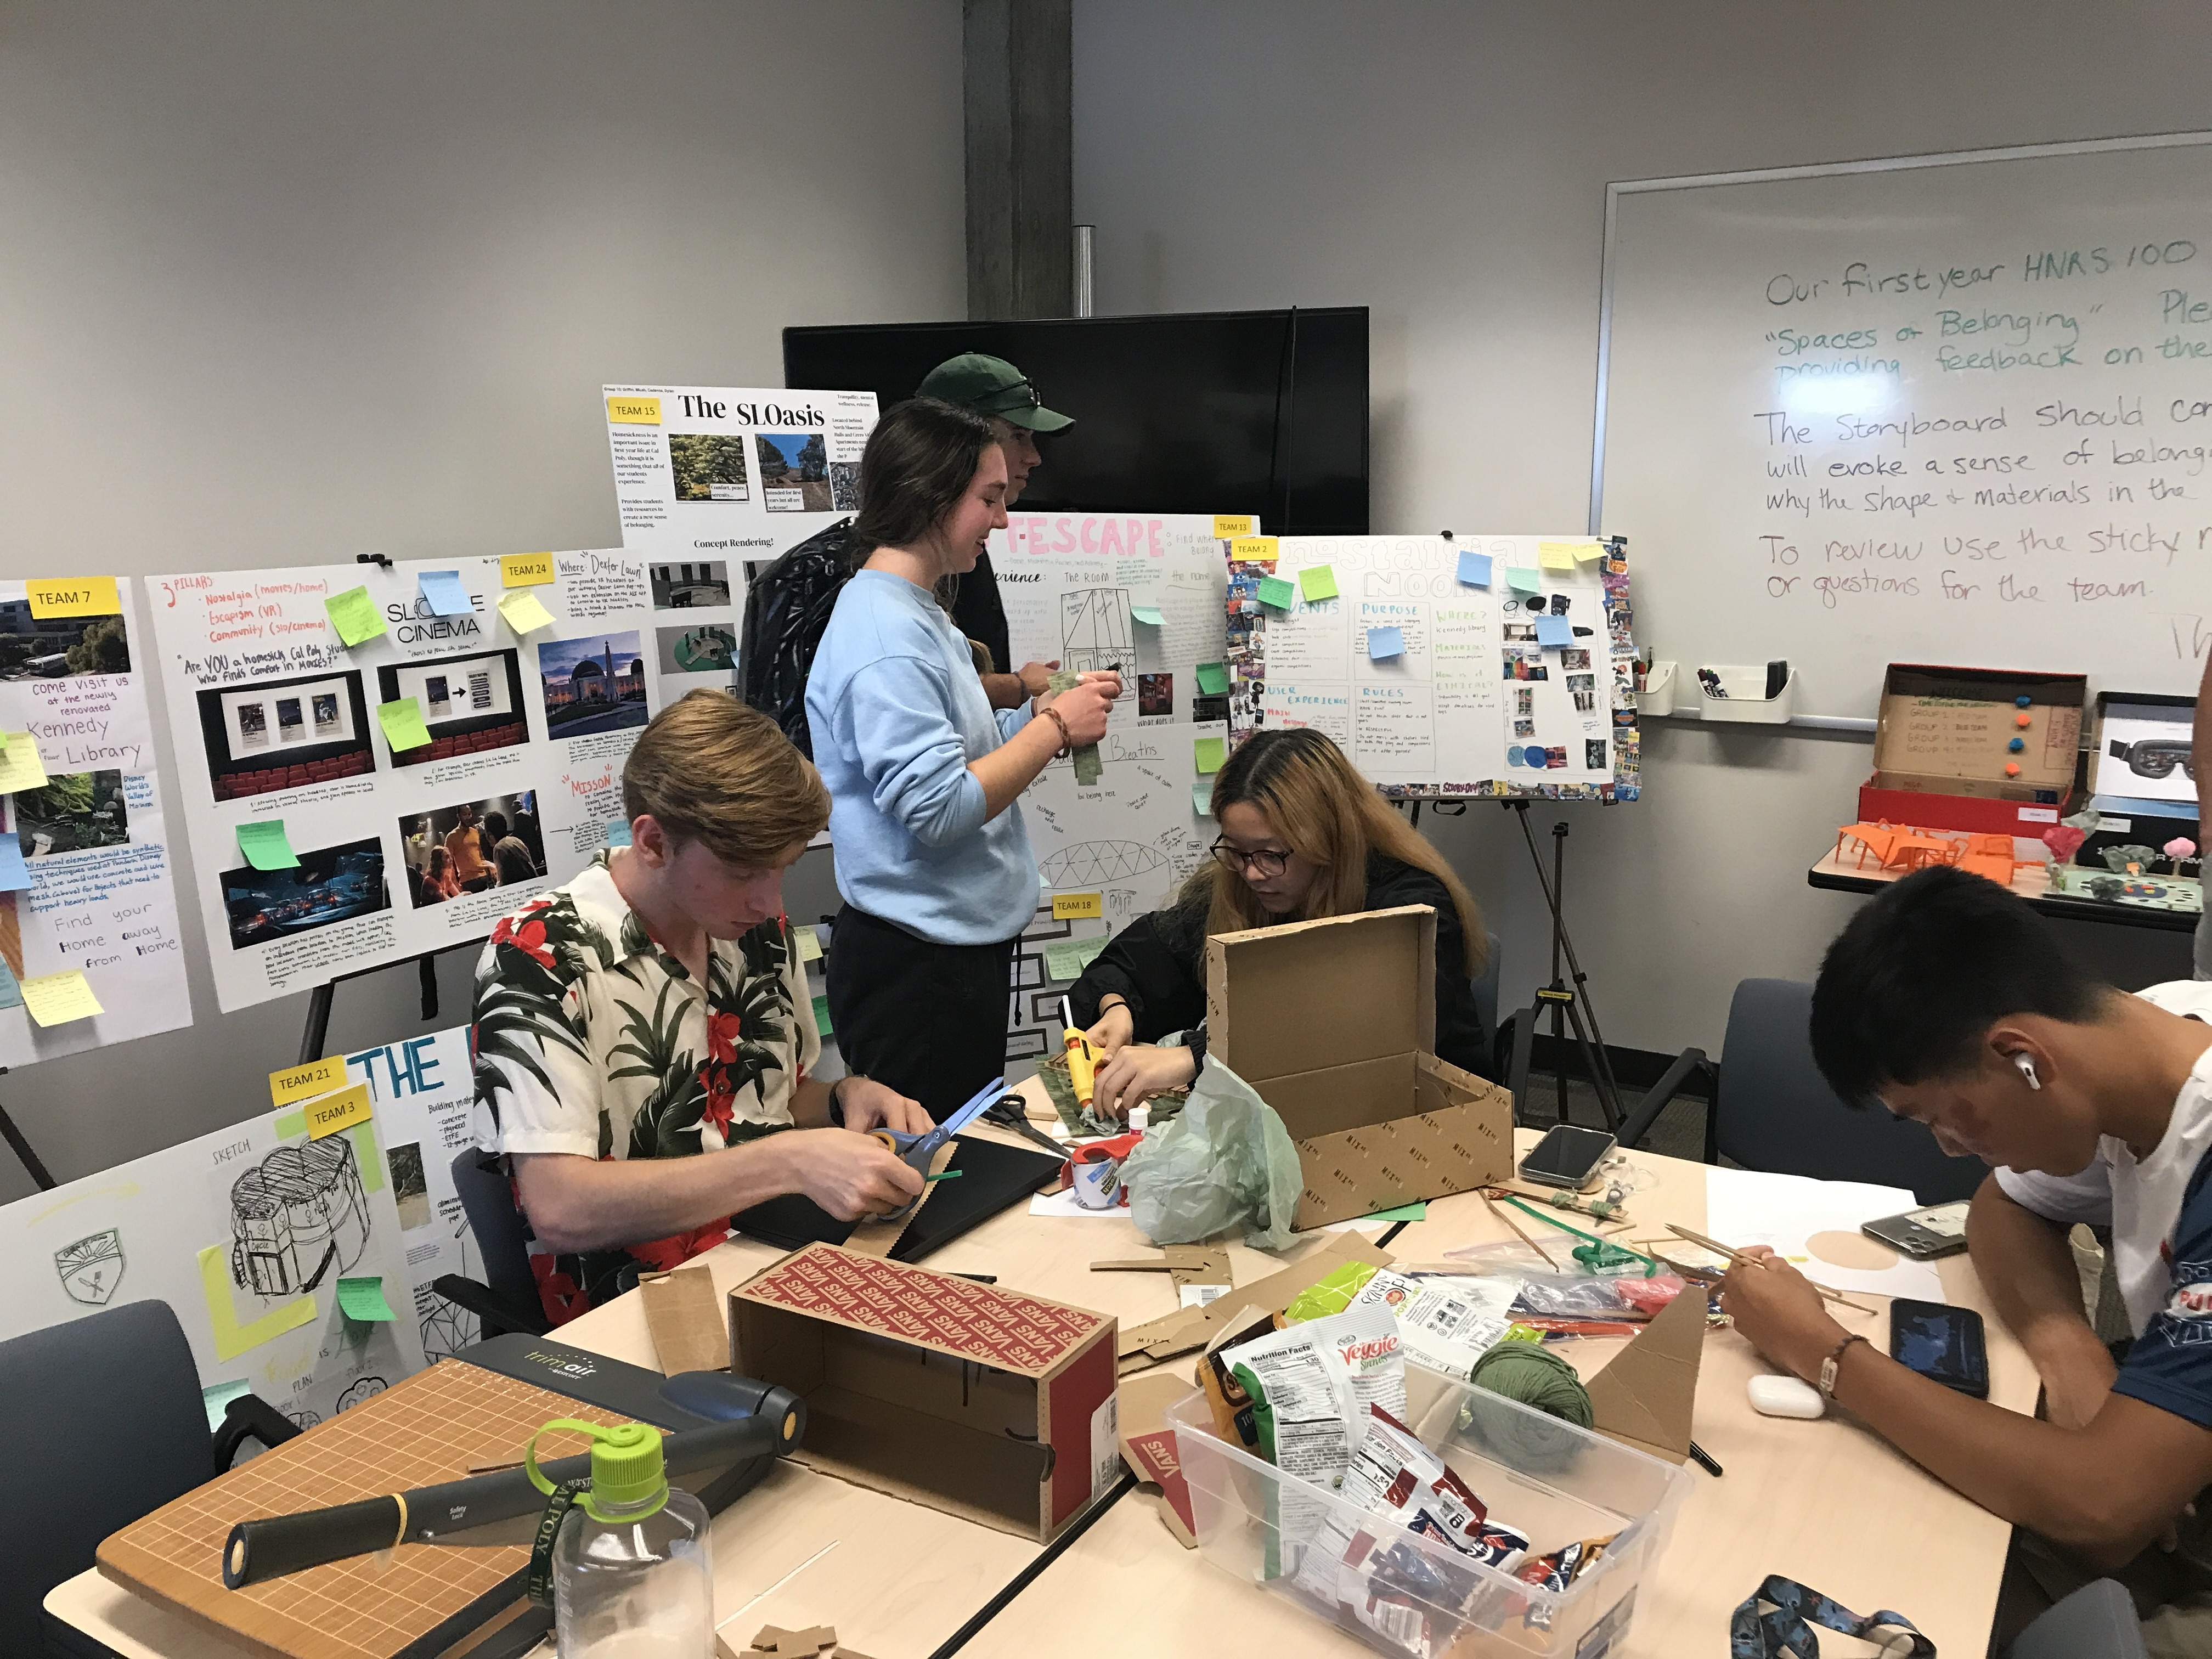 Students gather around a table covered in poster boards and sticky notes as they design a space of belonging.